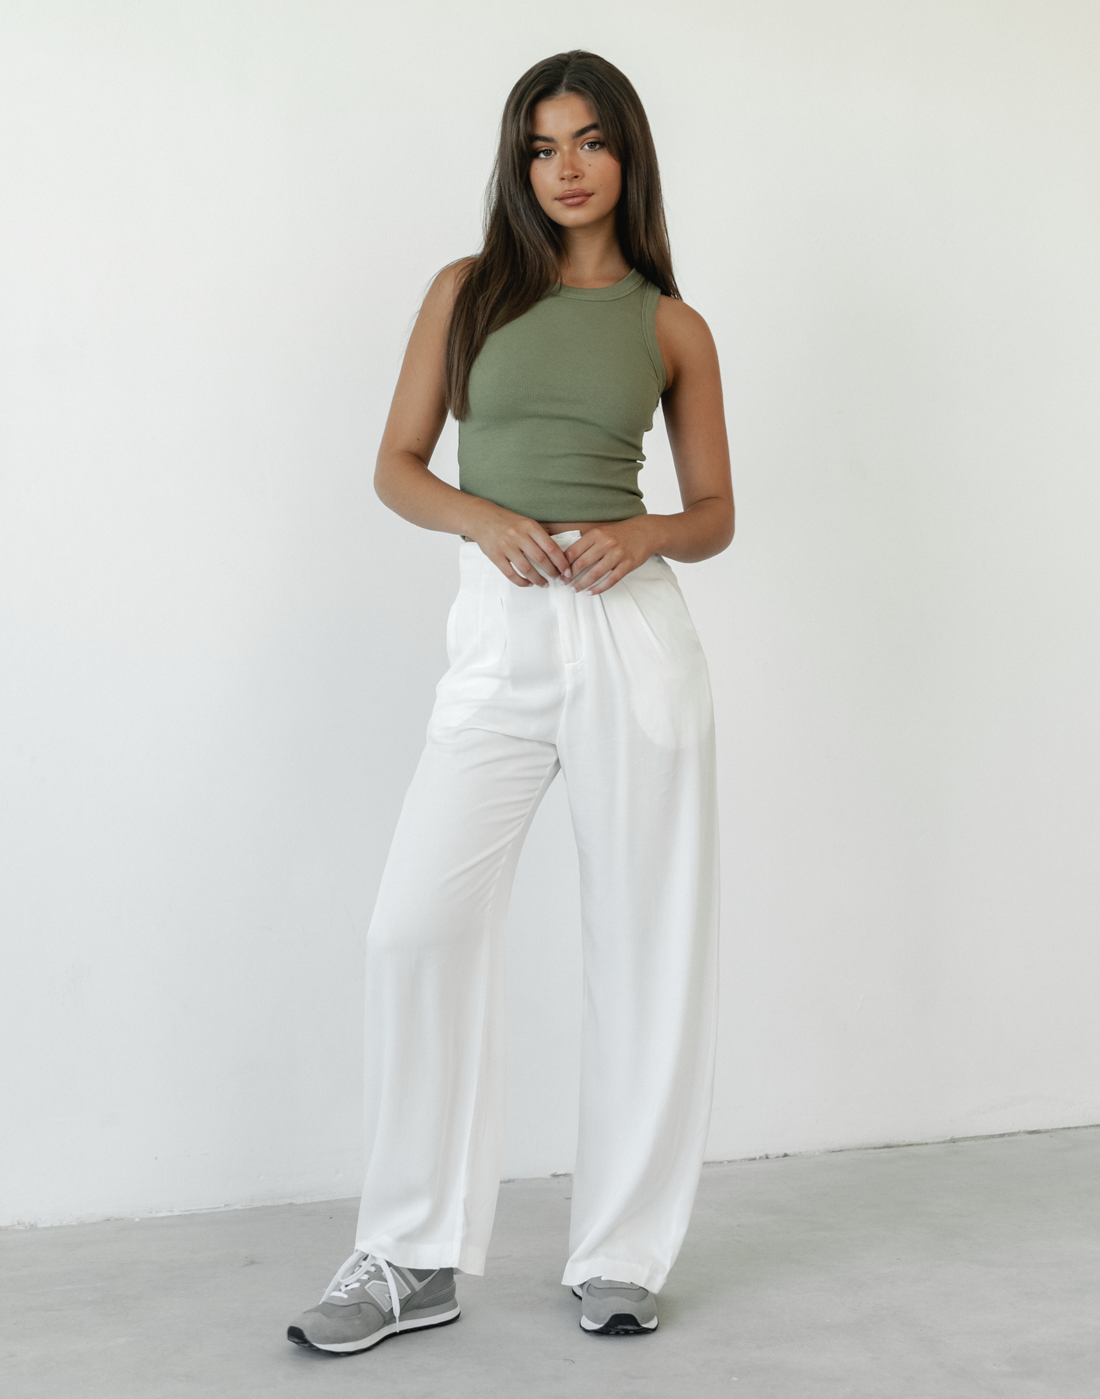 New Girl Pants (White) - White Pleated High Waisted Pants - Women's Pants - Charcoal Clothing